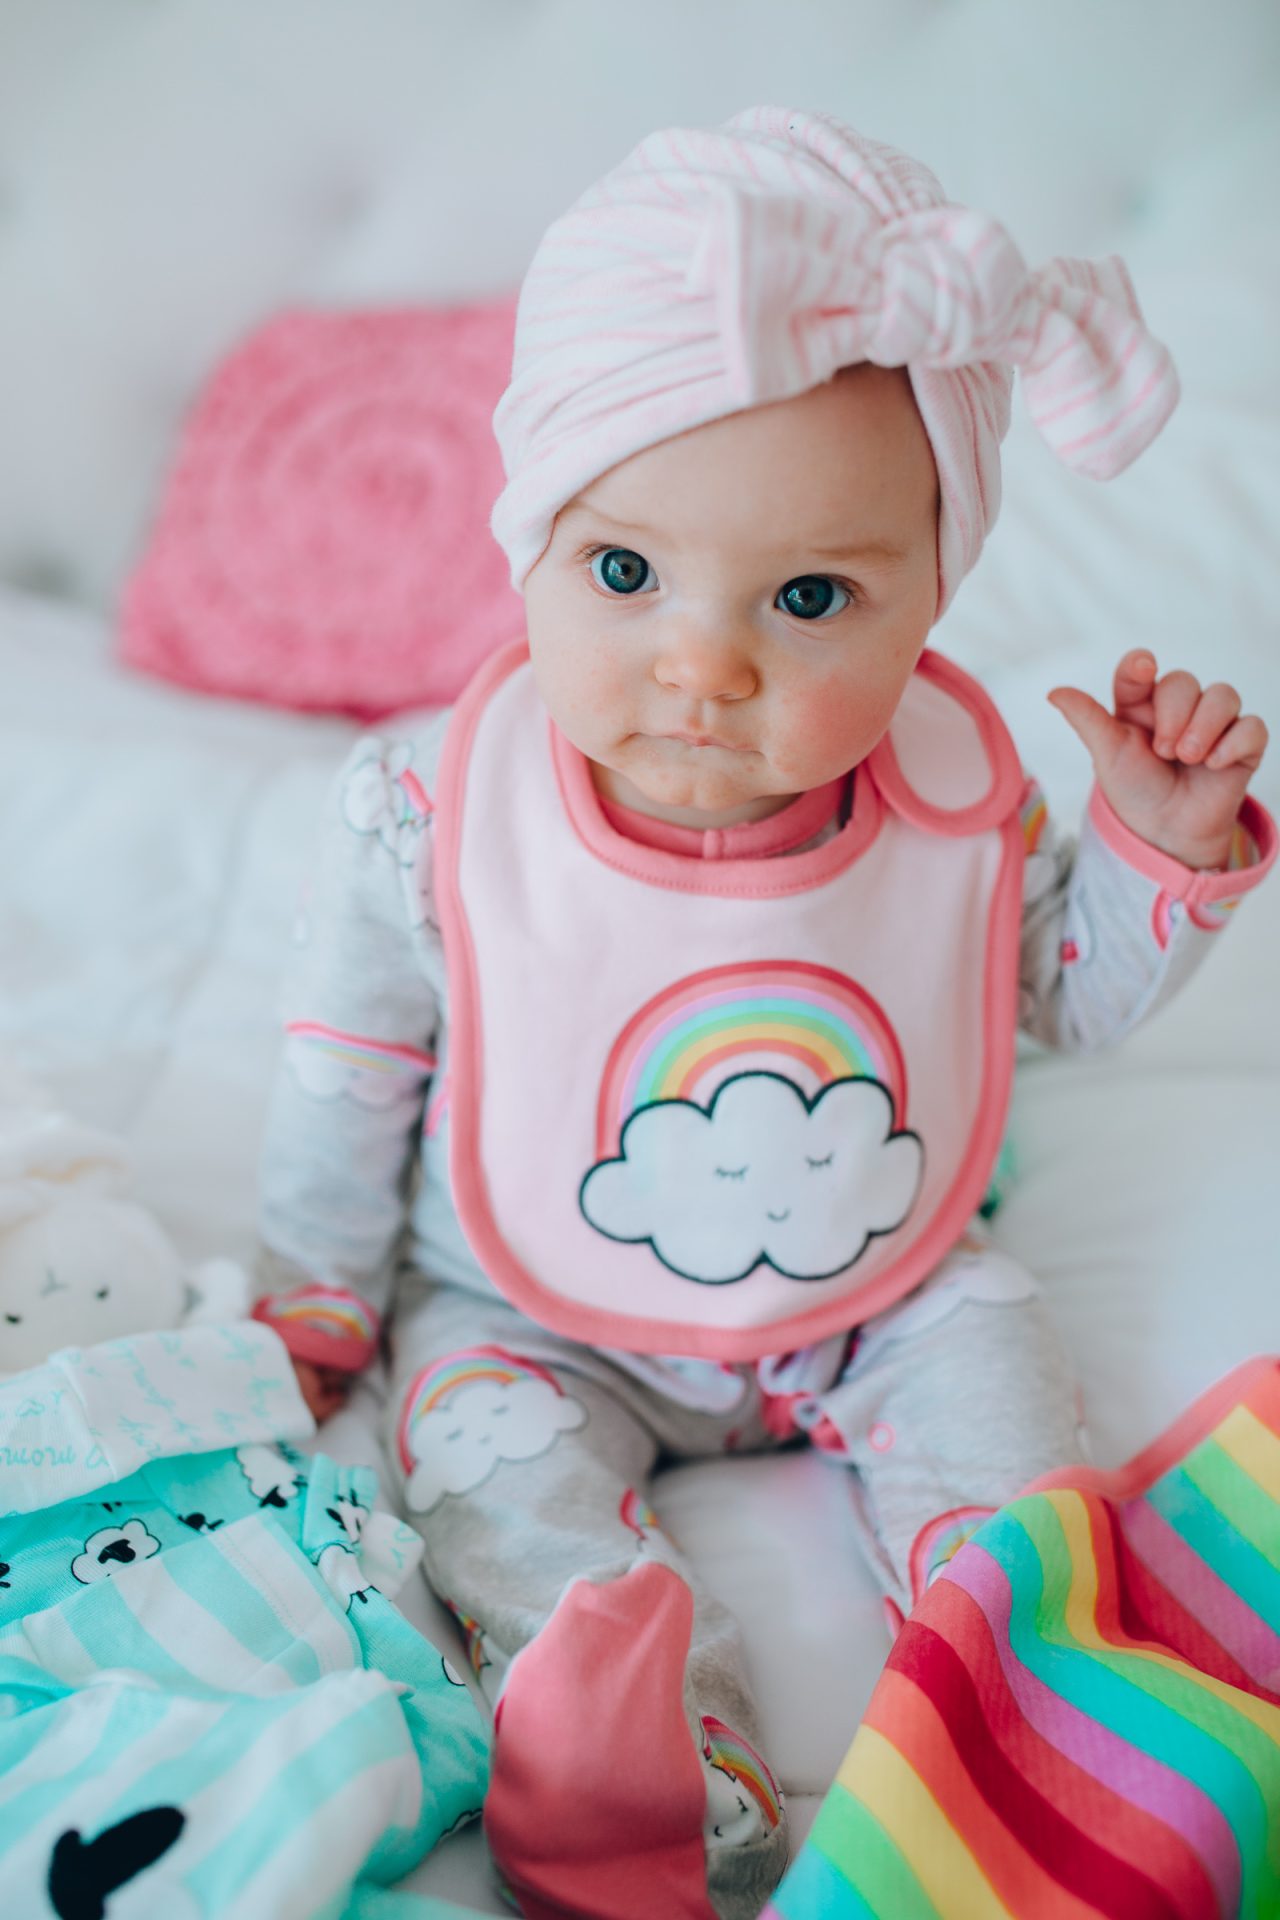 Chicago lifestyle blogger Happily Inspired shares road trip hacks with a baby! Plus Children's Place Bundles outfits that are easy-on-the-go!